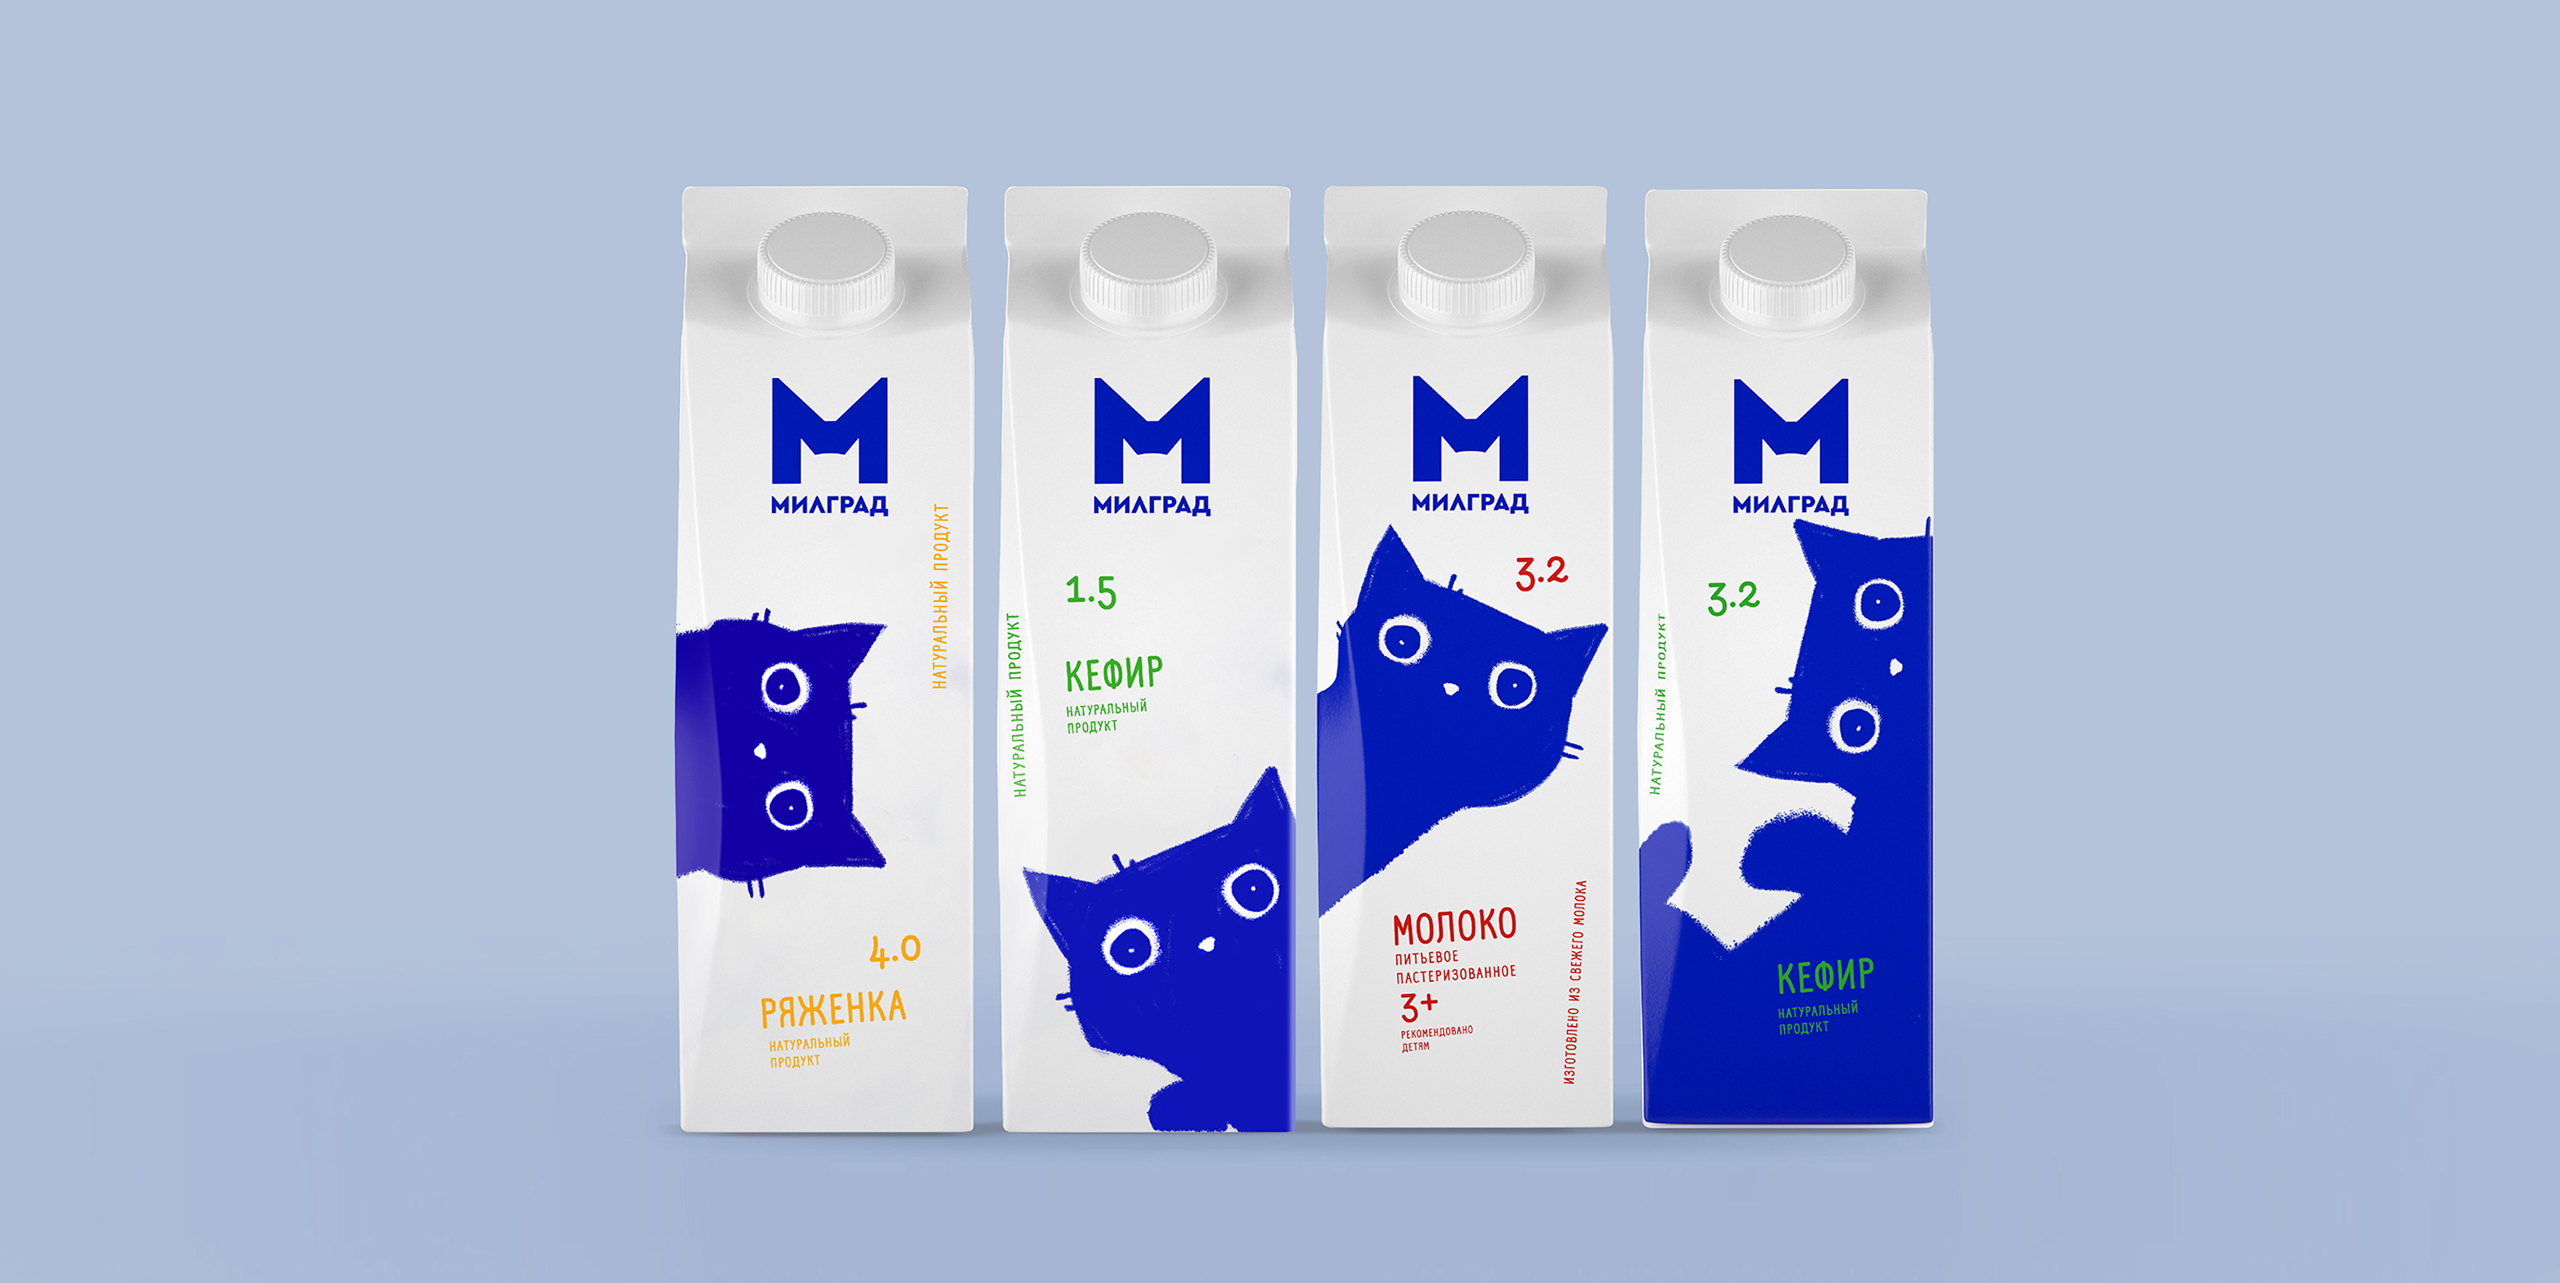 Cat-inspired dairy packaging design became popular in Asia